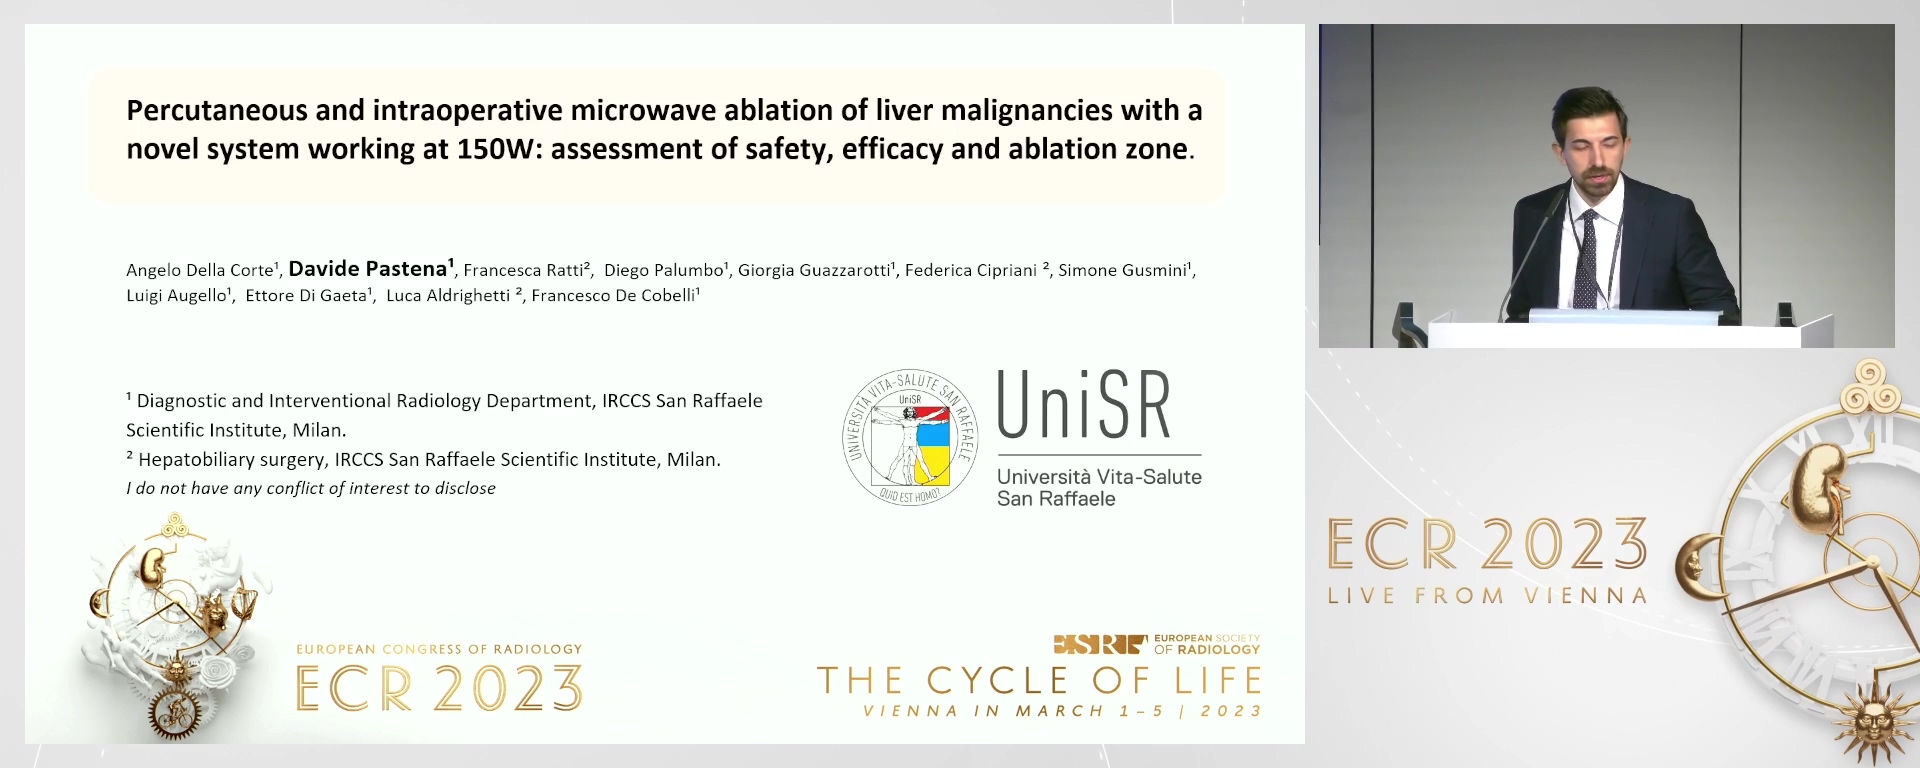 Percutaneous and intraoperative microwave ablation of liver malignancies with a novel system working at 150W: assessment of safety, efficacy and ablation zone